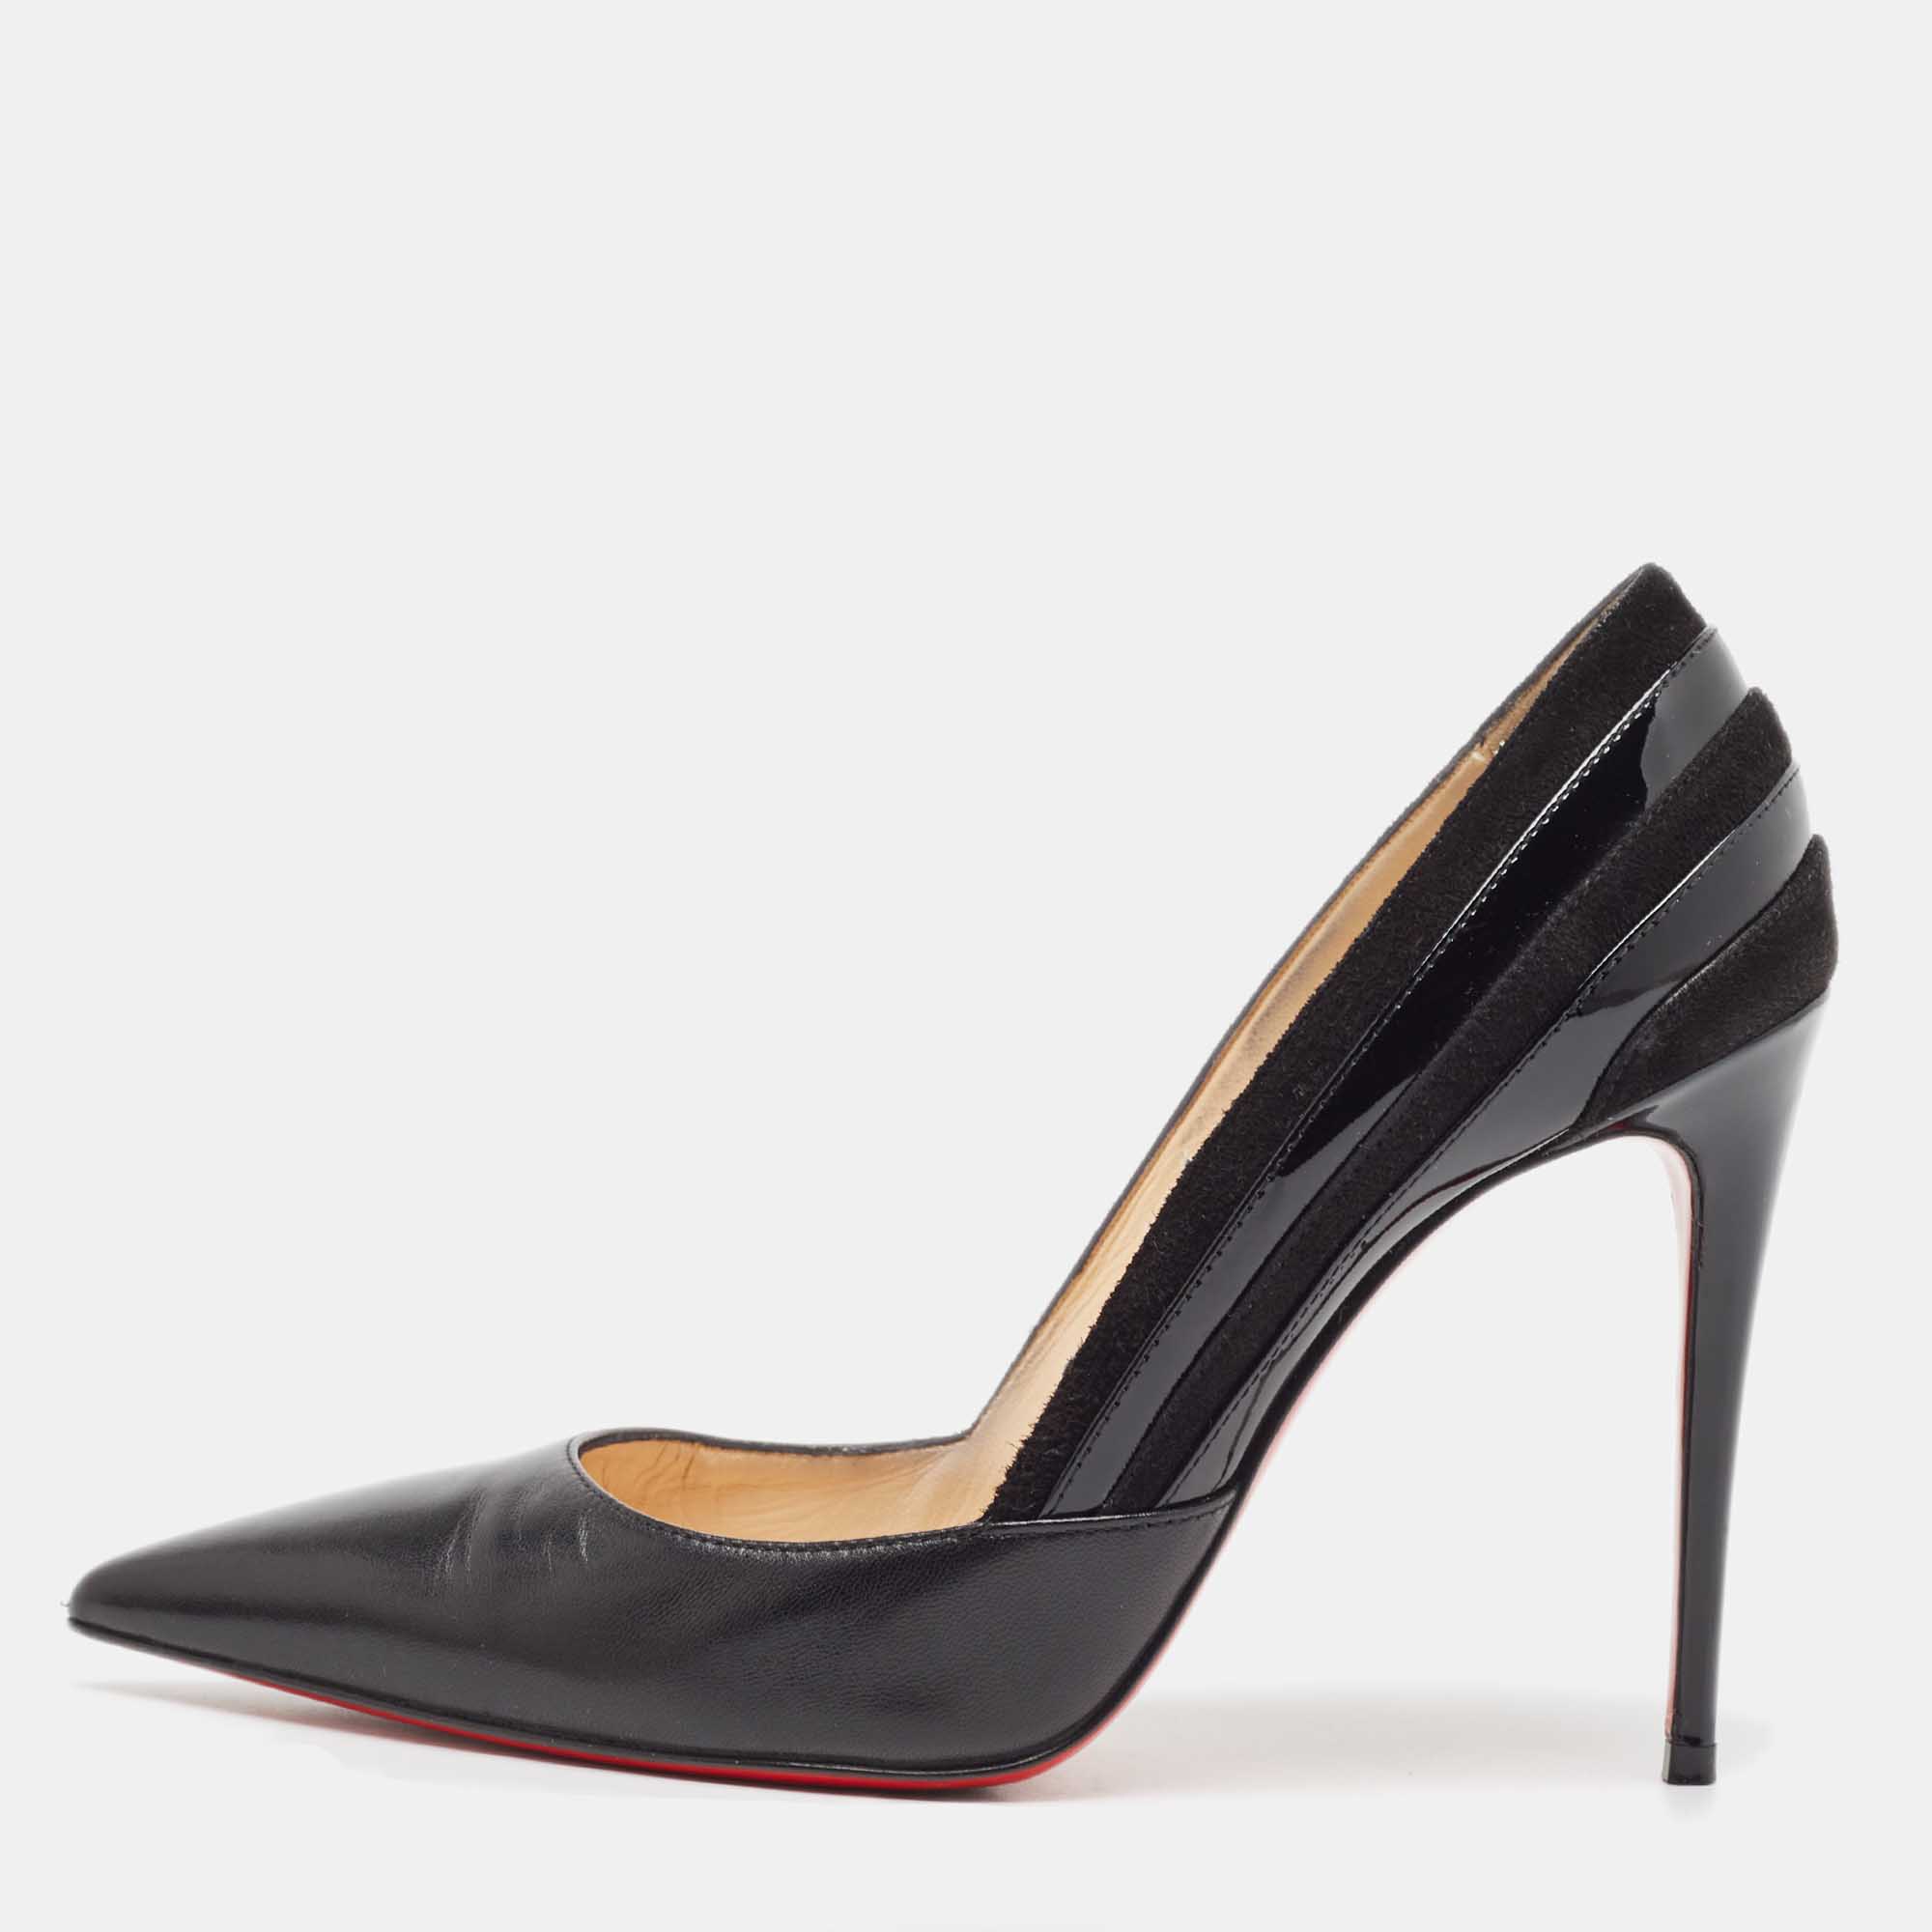 Pre-owned Christian Louboutin Black Patent Pigalle Pumps Size 36